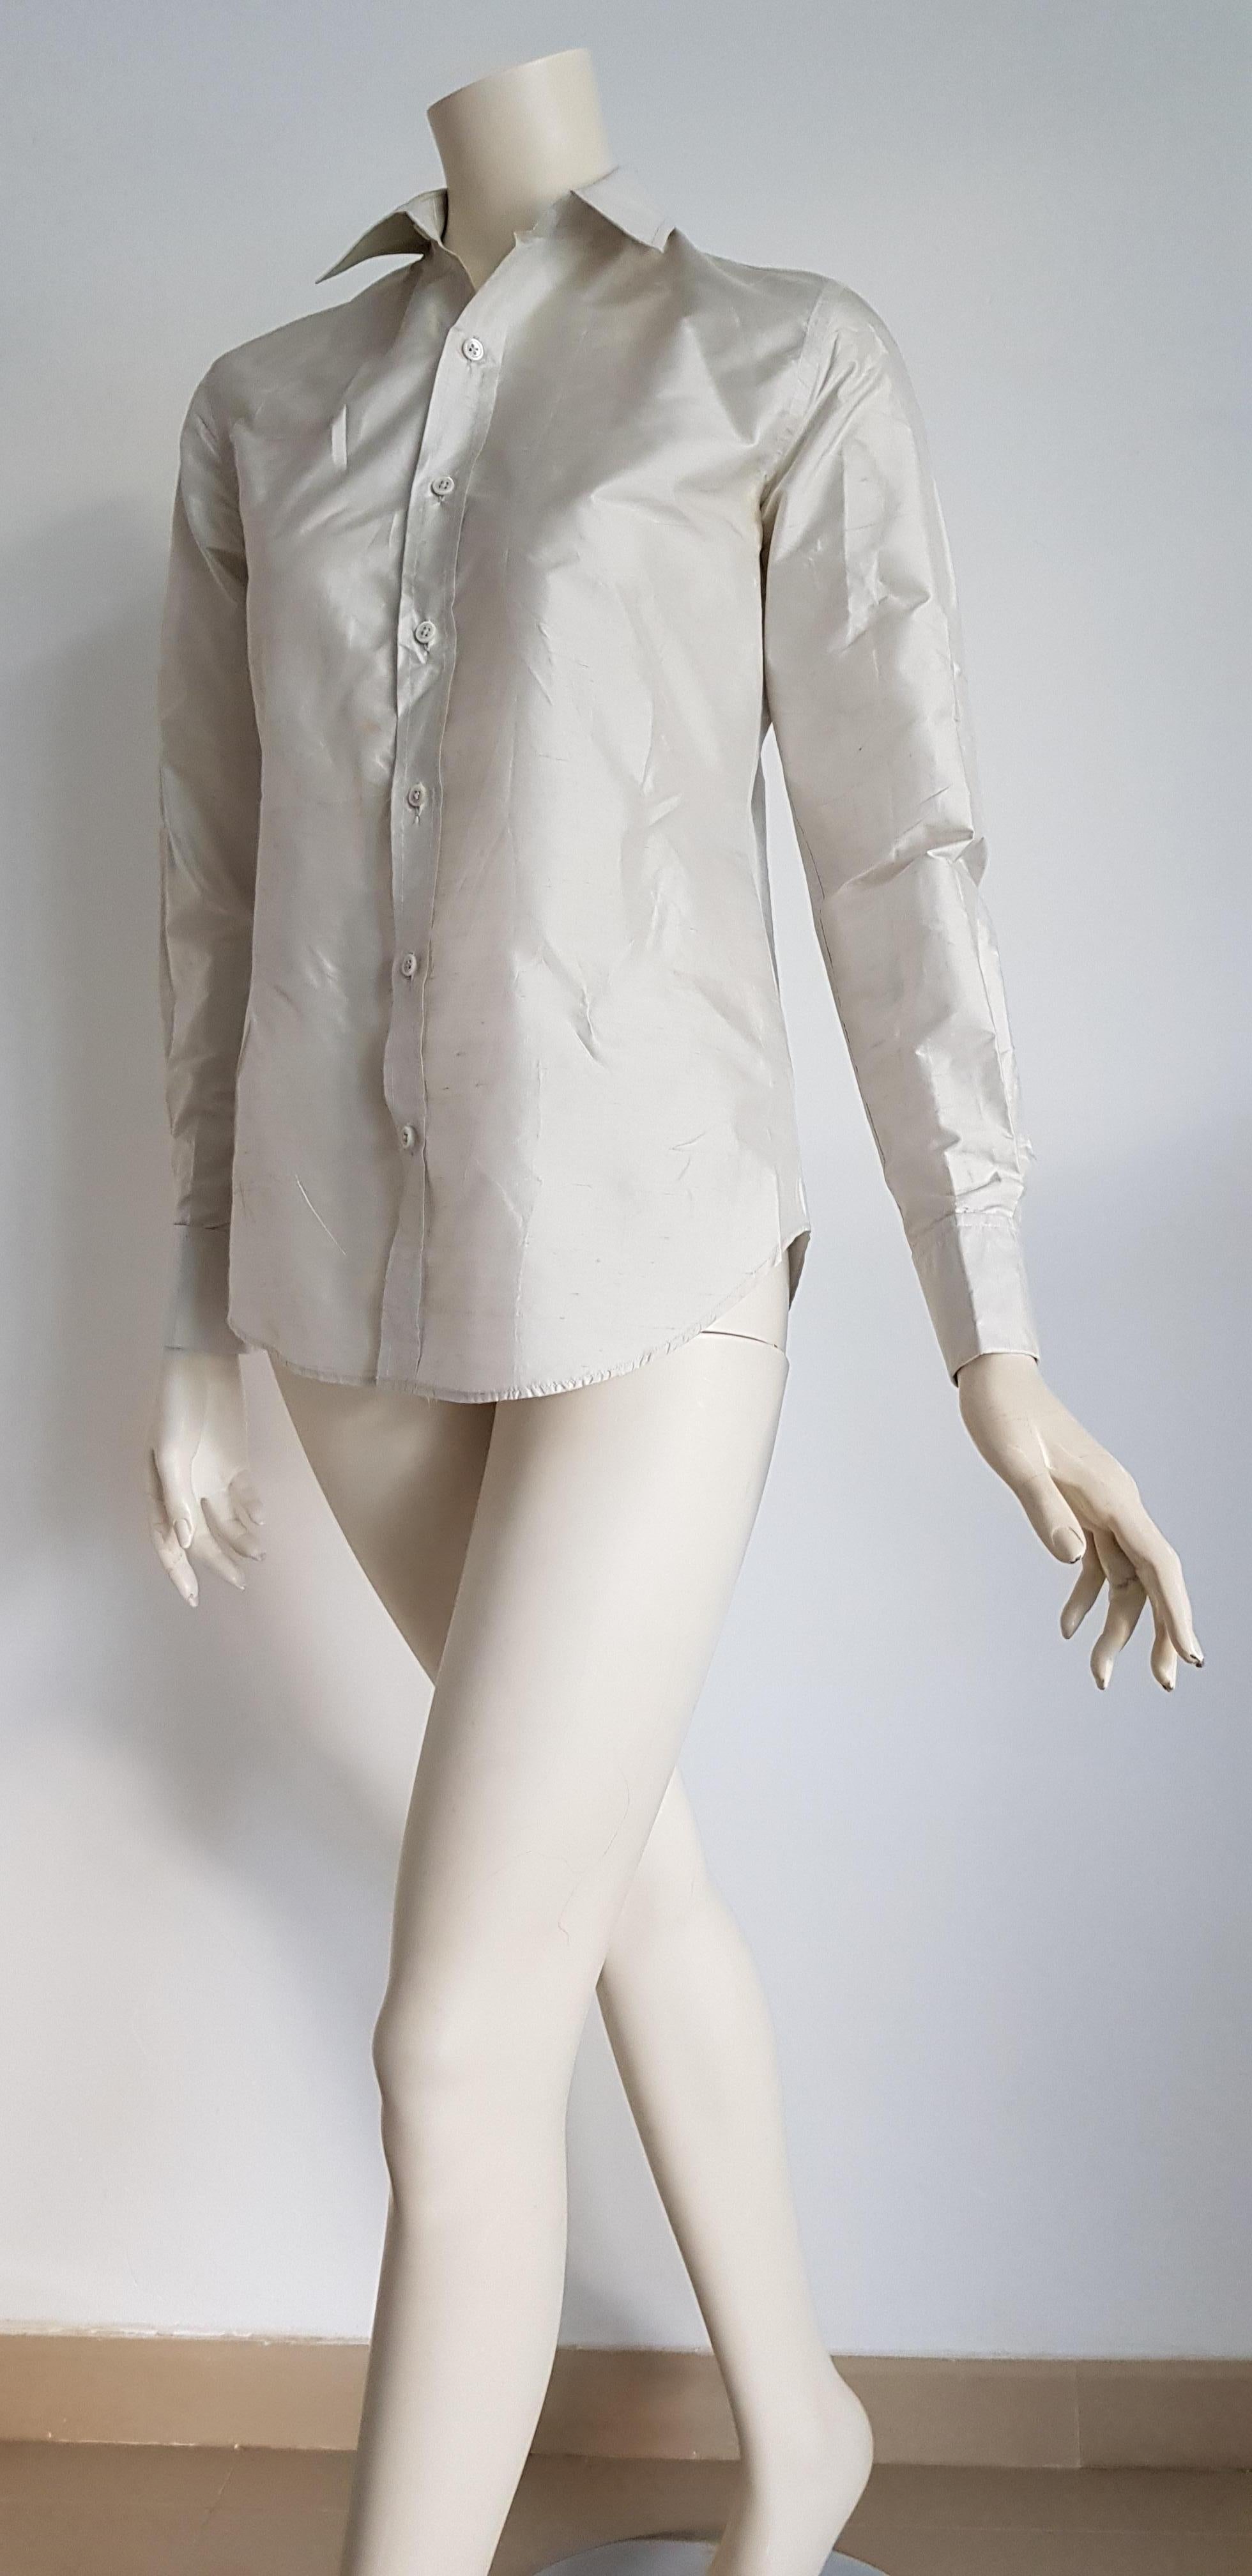 Ralph LAUREN pearl grey silk shirt - Unworn, New.
..
SIZE: equivalent to about Small / Medium, please review approx measurements as follows in cm: lenght 70, chest underarm to underarm 49, bust circumference 90, shoulder from seam to seam 40, sleeve